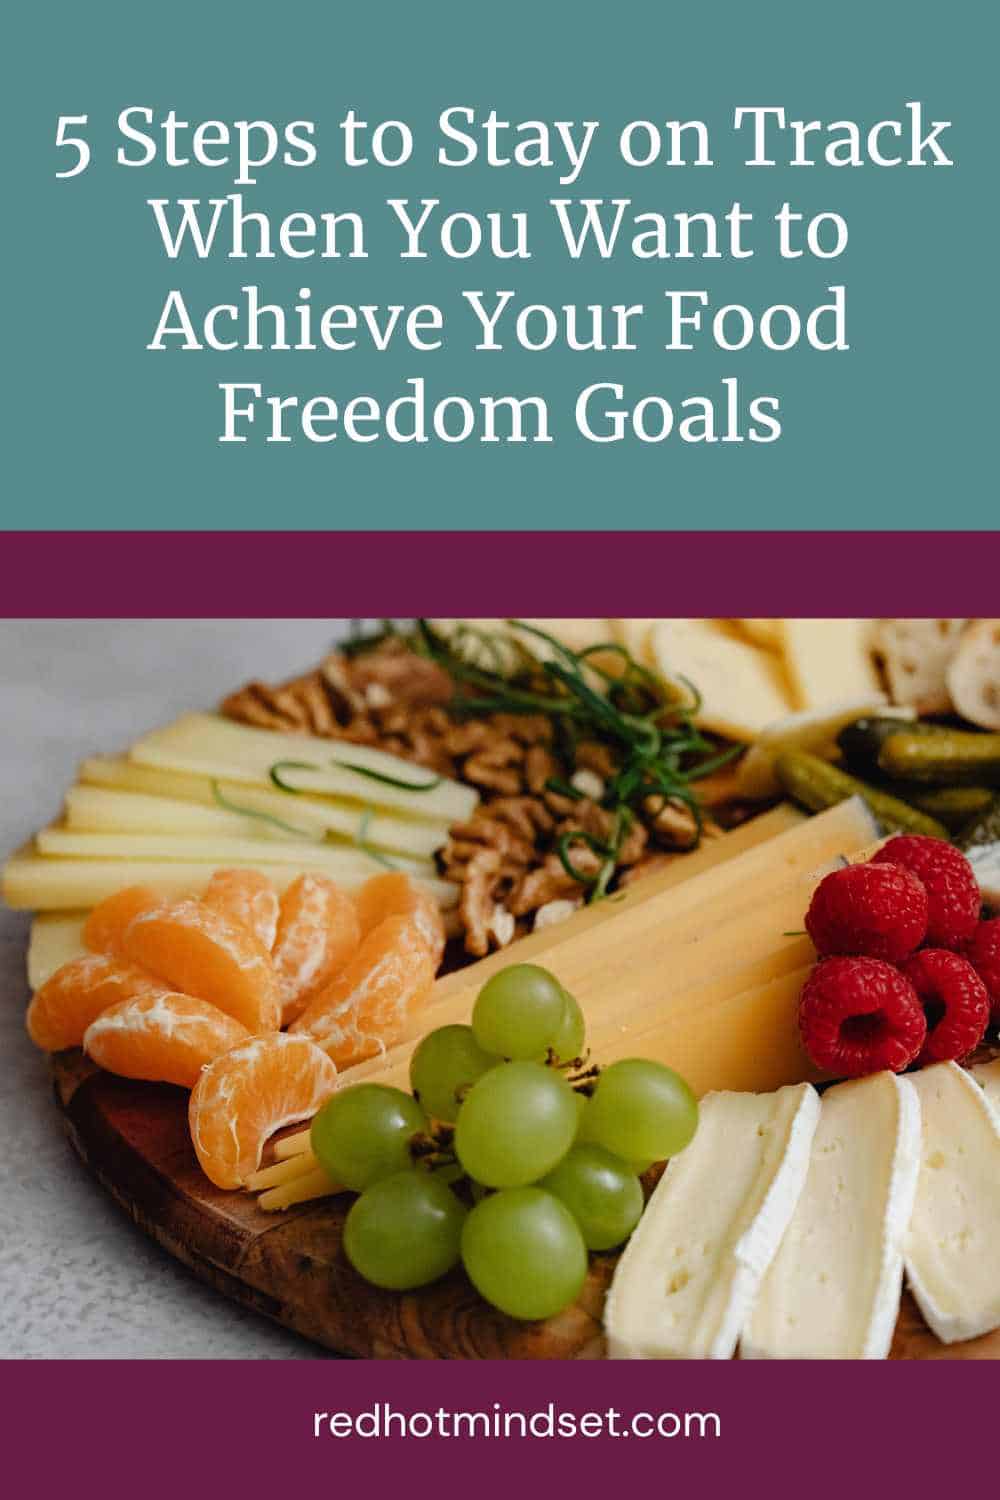 Ep 201 | 5 Steps to Stay on Track When You Want to Achieve Your Food Freedom Goals with Andrea Caprio